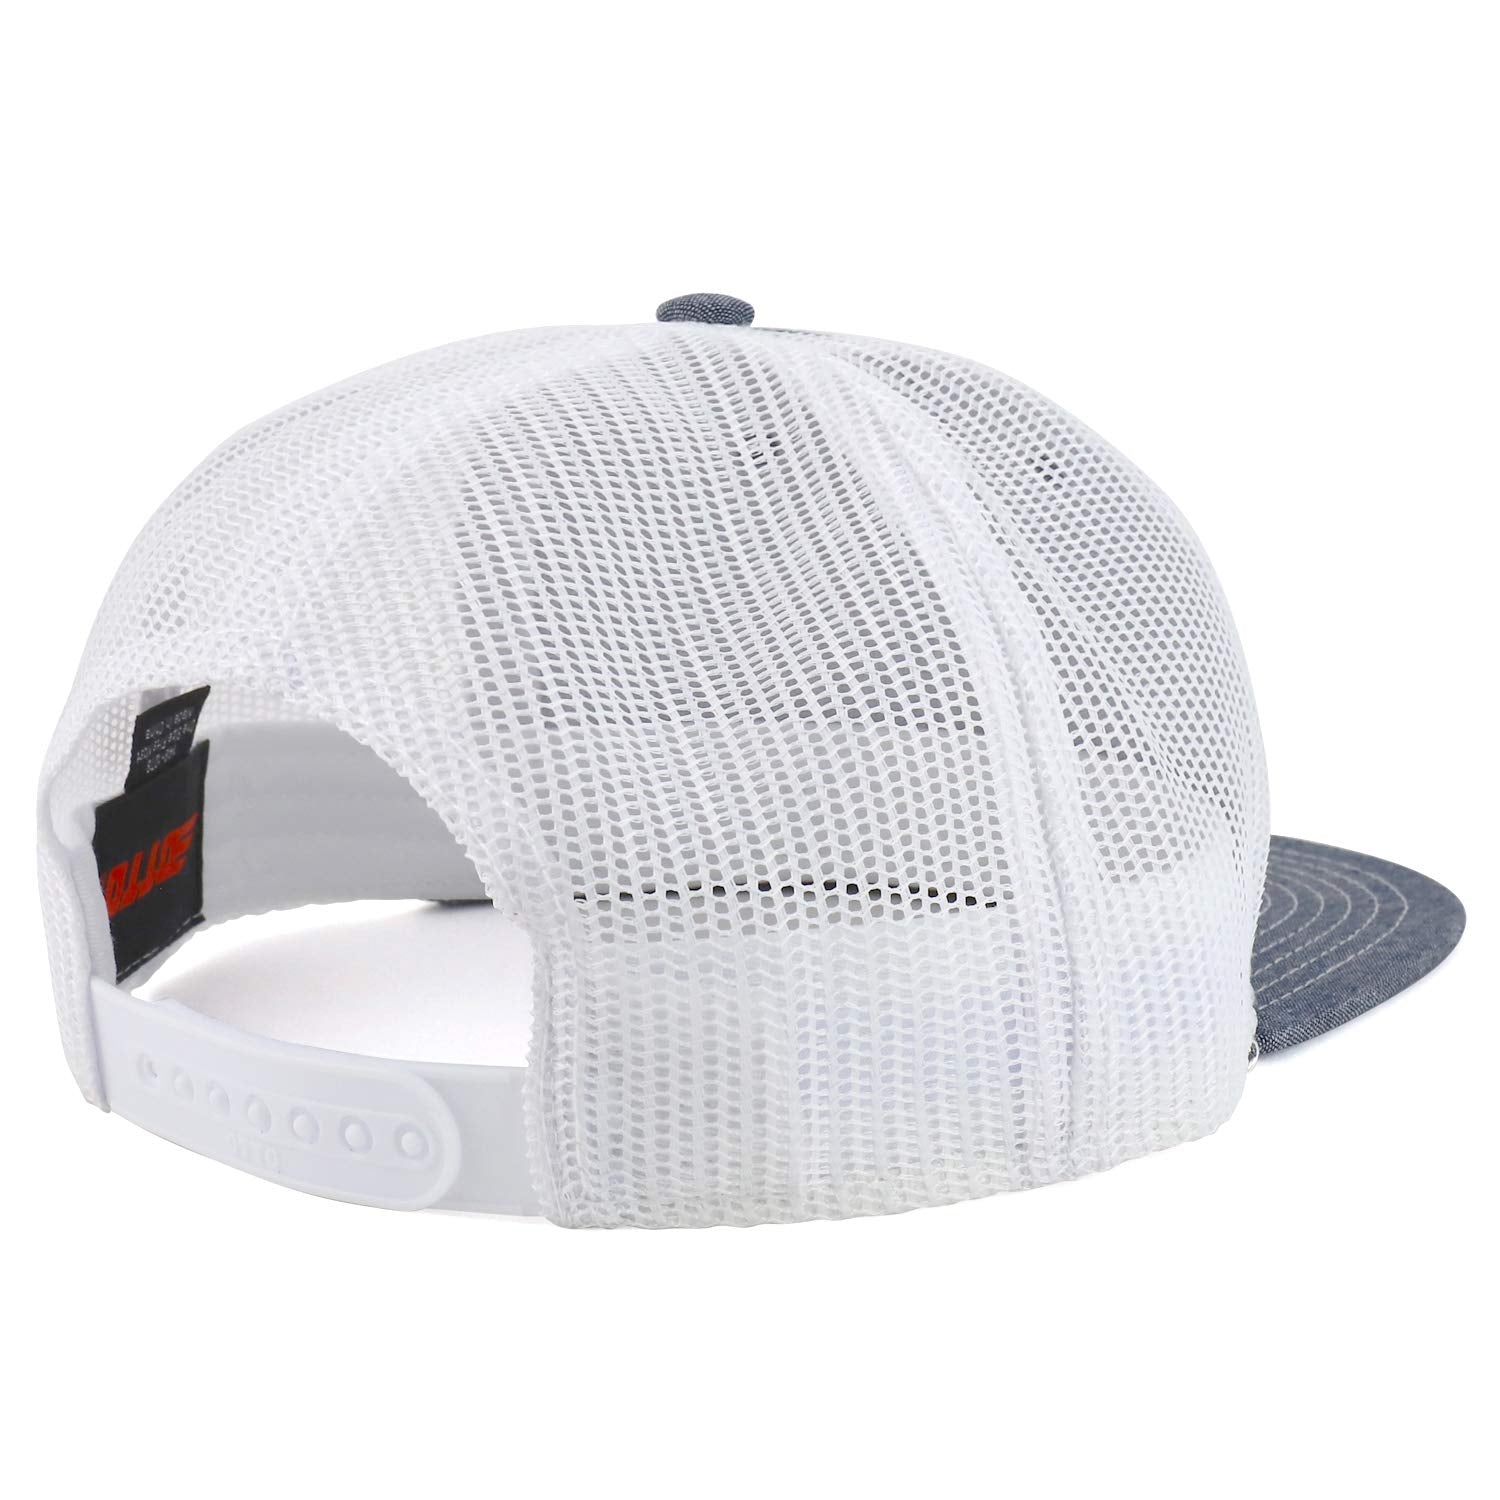 Armycrew Structured Chambray Flatbill Mesh Trucker Snapback Cap - Navy White